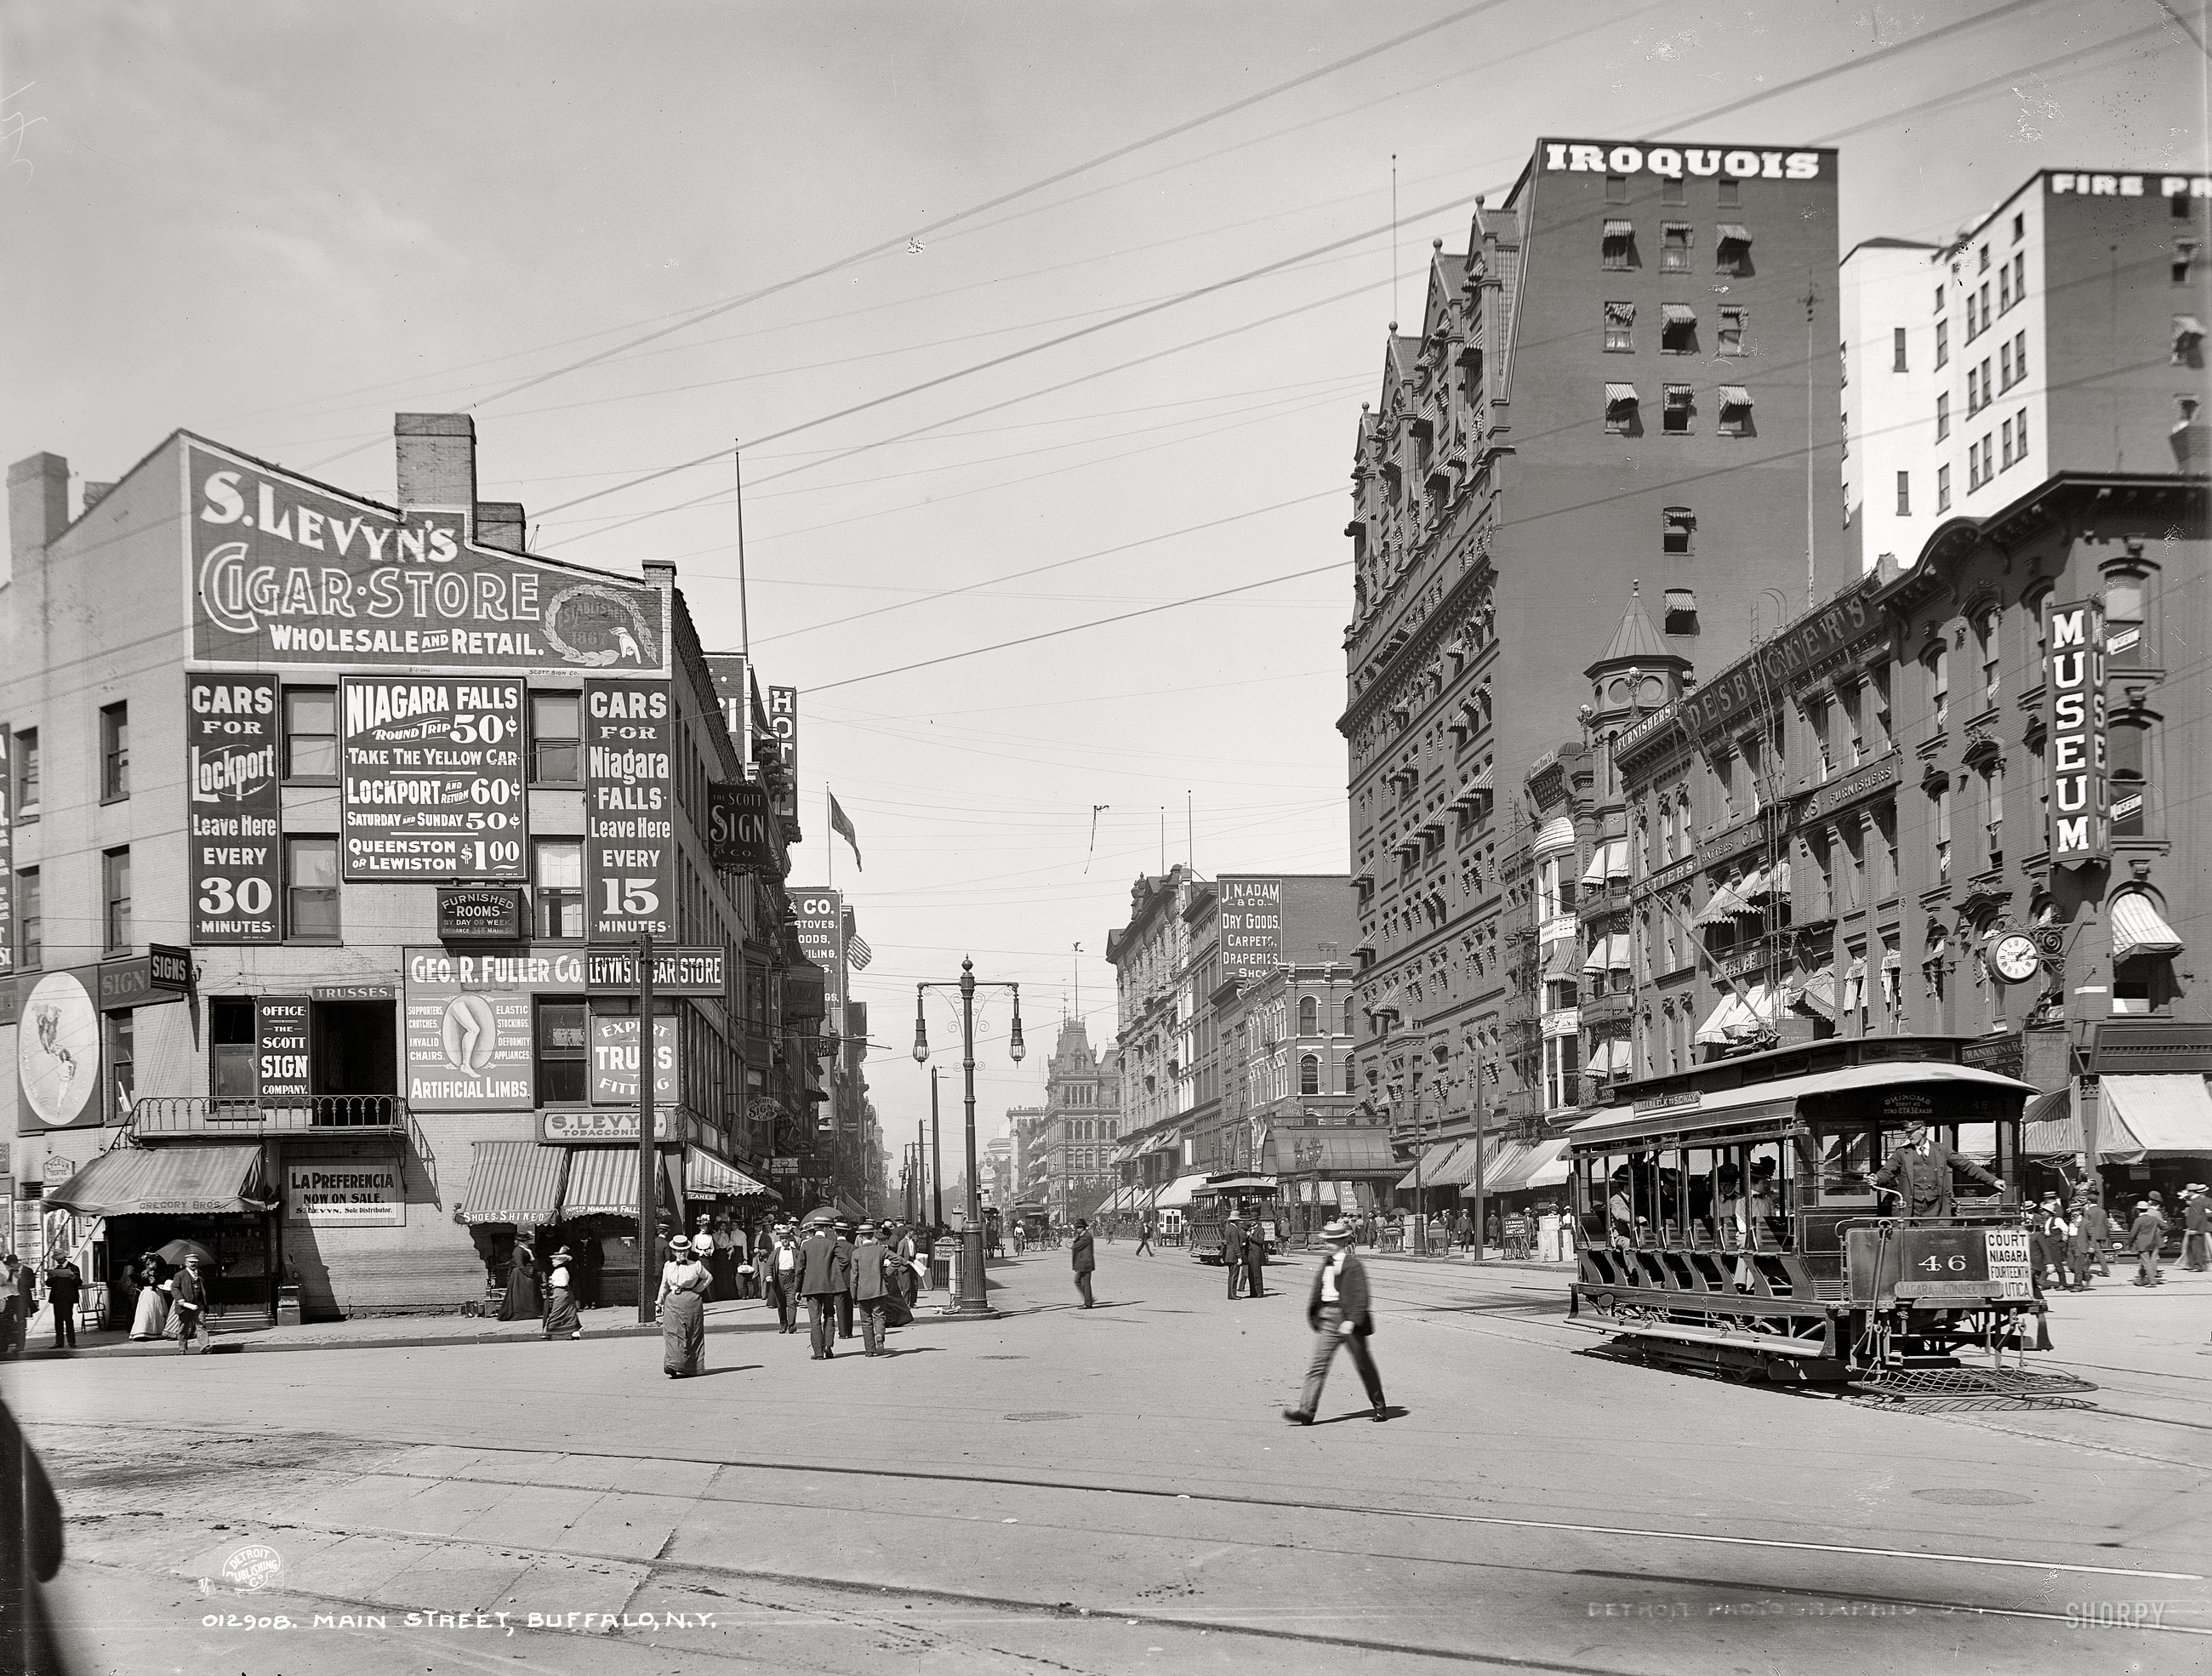 "Main Street, Buffalo, N.Y., circa 1900." The merchants of Buffalo, aside from making that fine city a haven for the herniated, also offered a wide range of "deformity appliances." Detroit Publishing Co. glass negative. View full size.